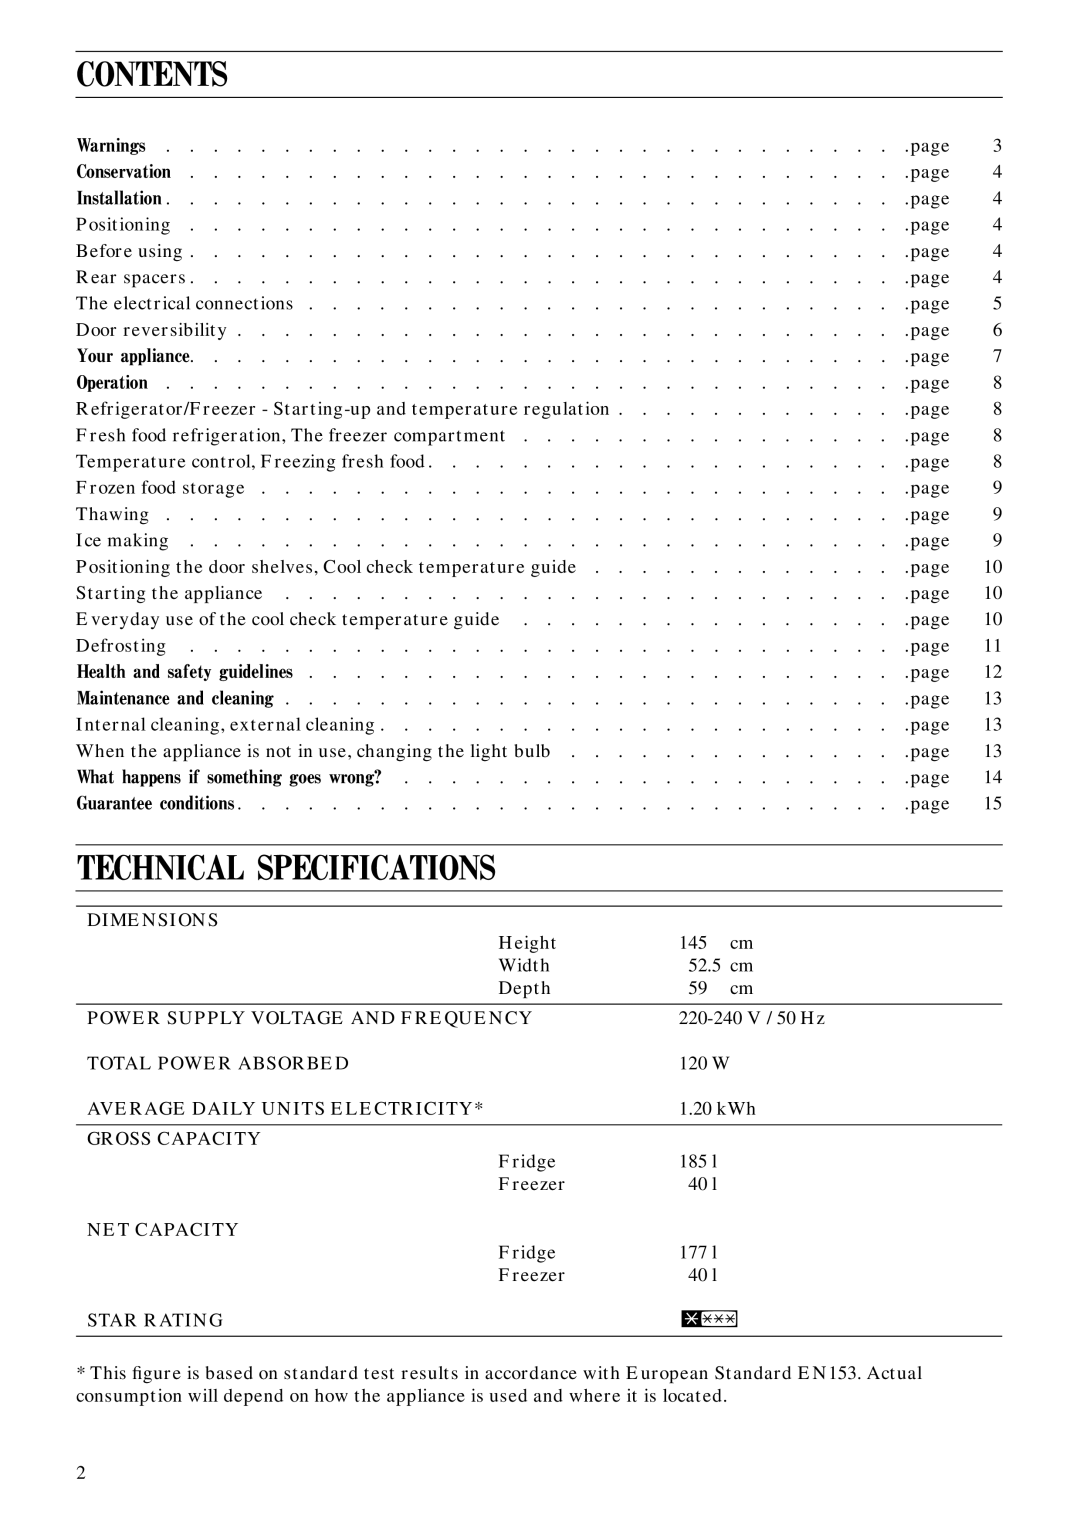 Zanussi ZFC 67/14 manual Contents, Technical Specifications 